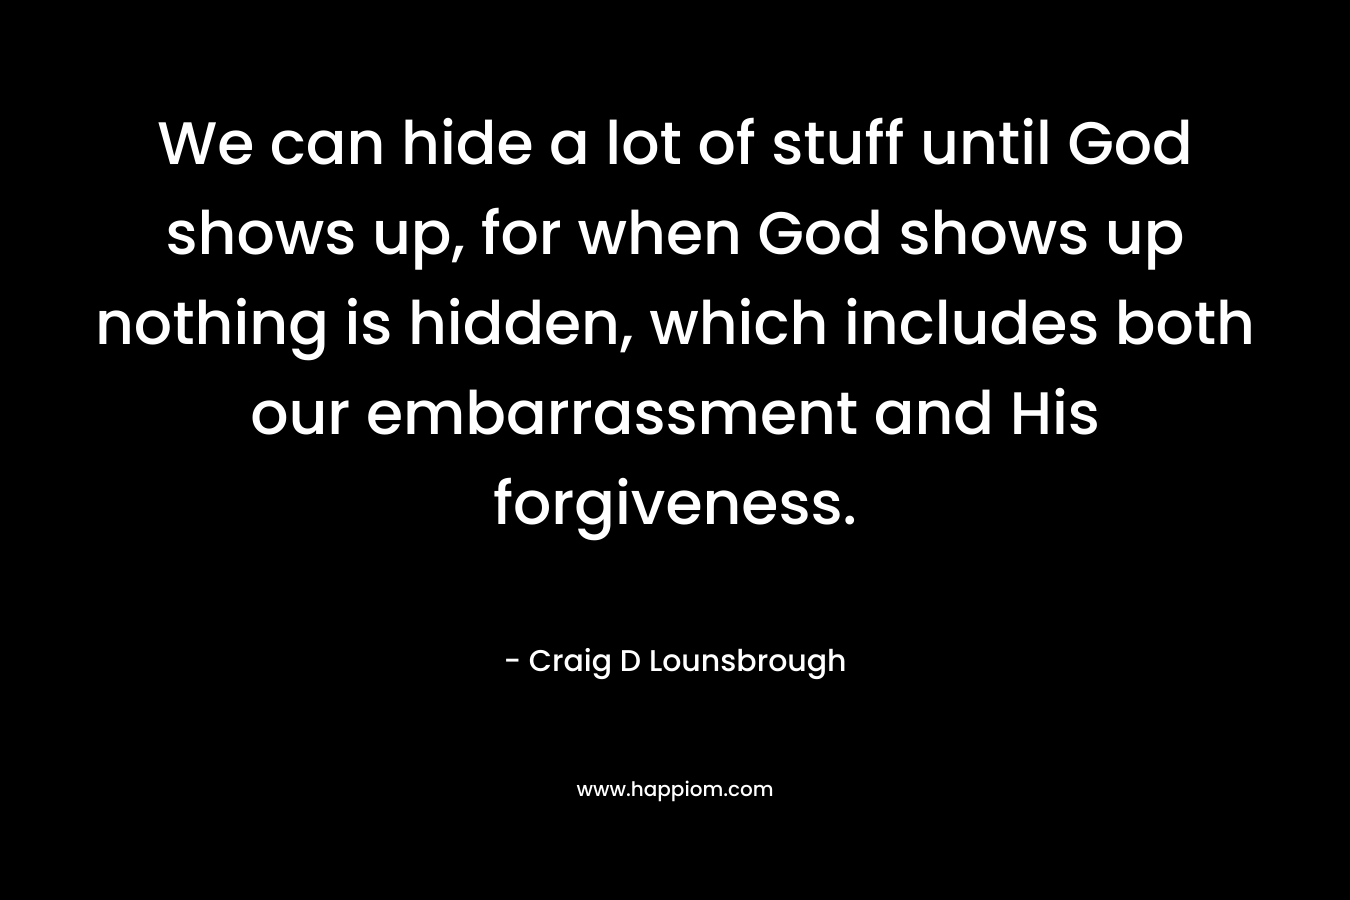 We can hide a lot of stuff until God shows up, for when God shows up nothing is hidden, which includes both our embarrassment and His forgiveness.